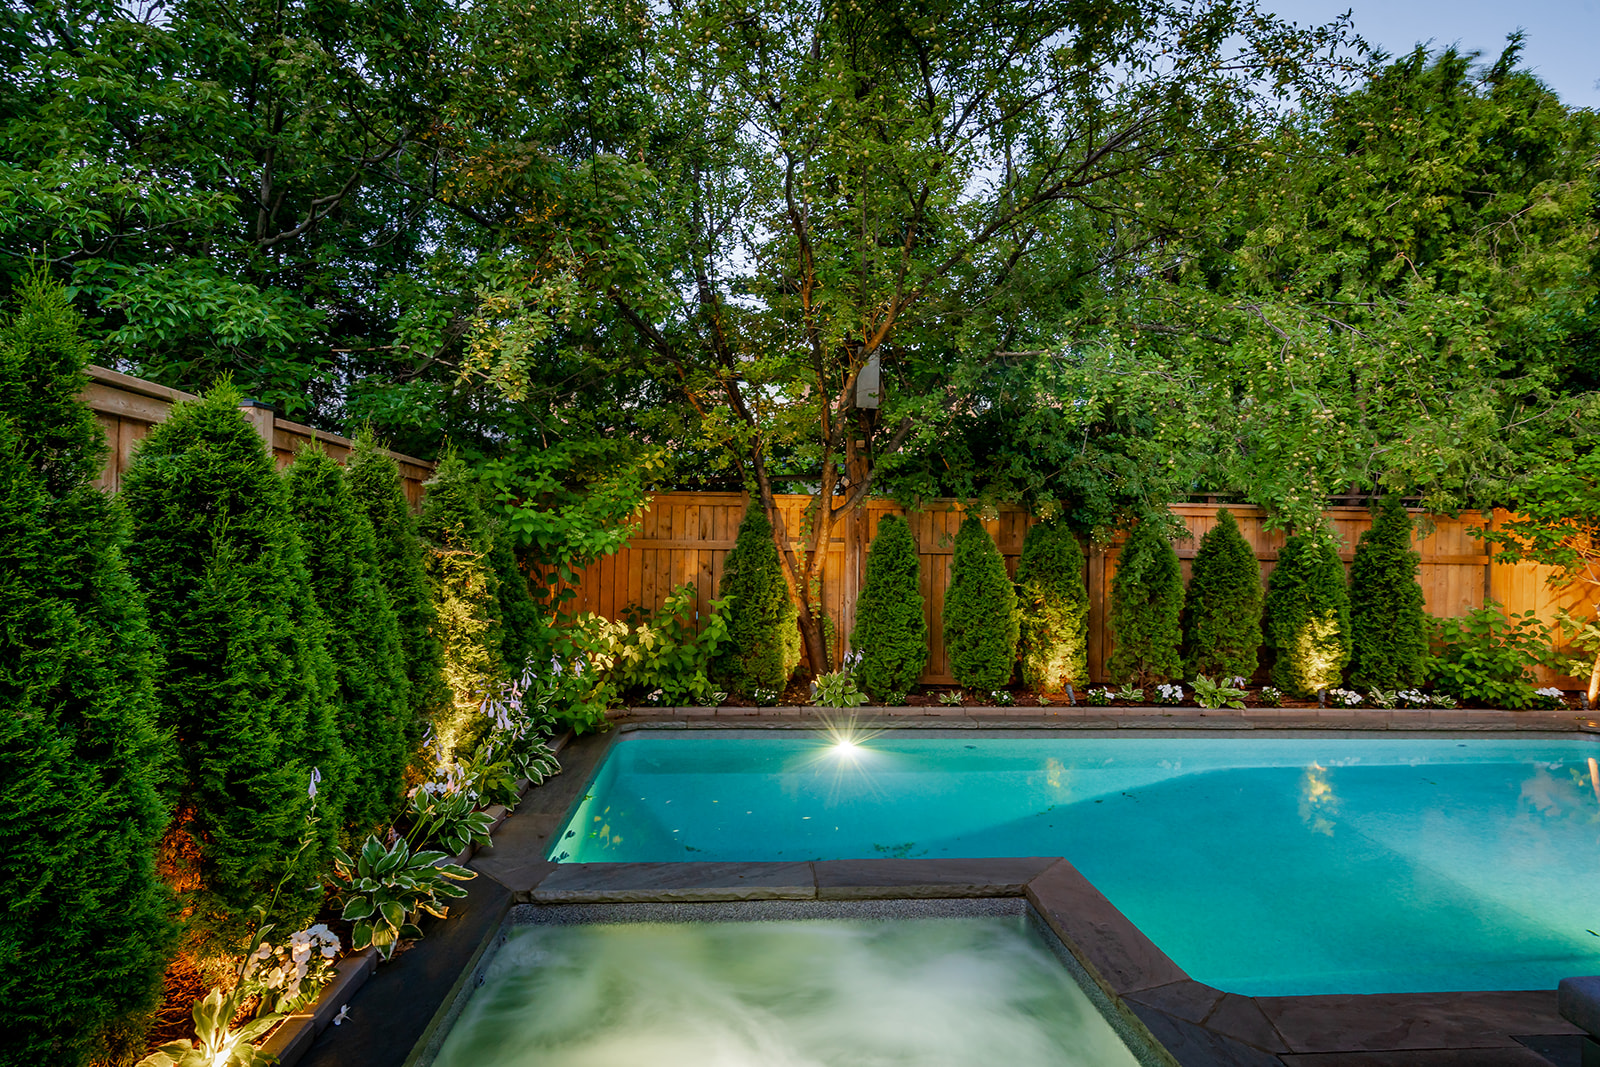 An inground pool with a jacuzzi on the left and trees surrounding the pool.